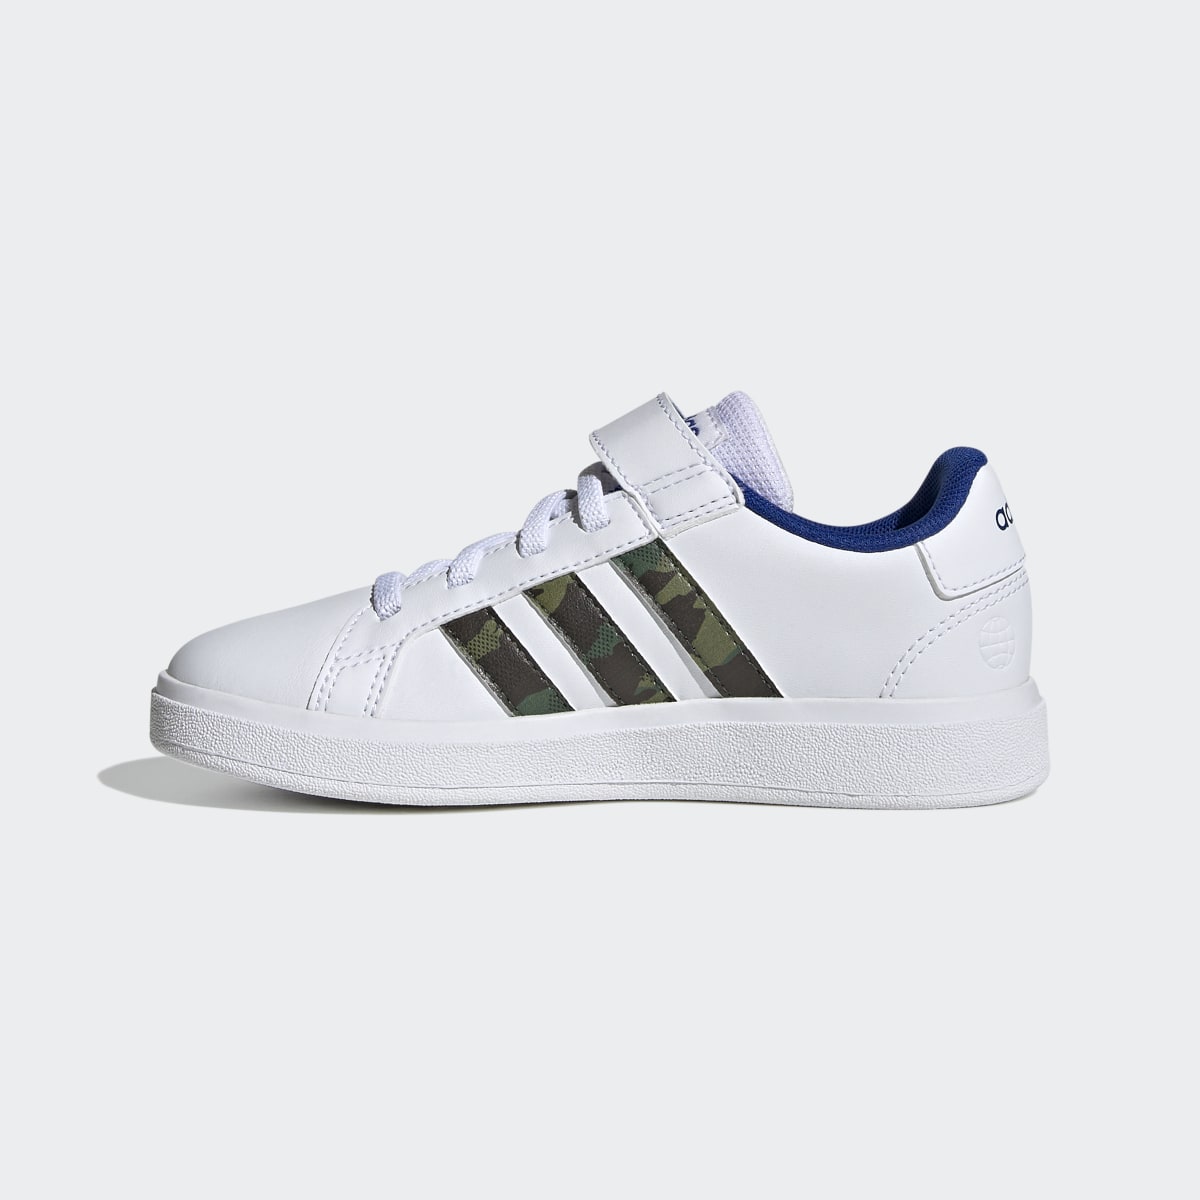 Adidas Grand Court Lifestyle Court Elastic Lace and Top Strap Shoes. 7